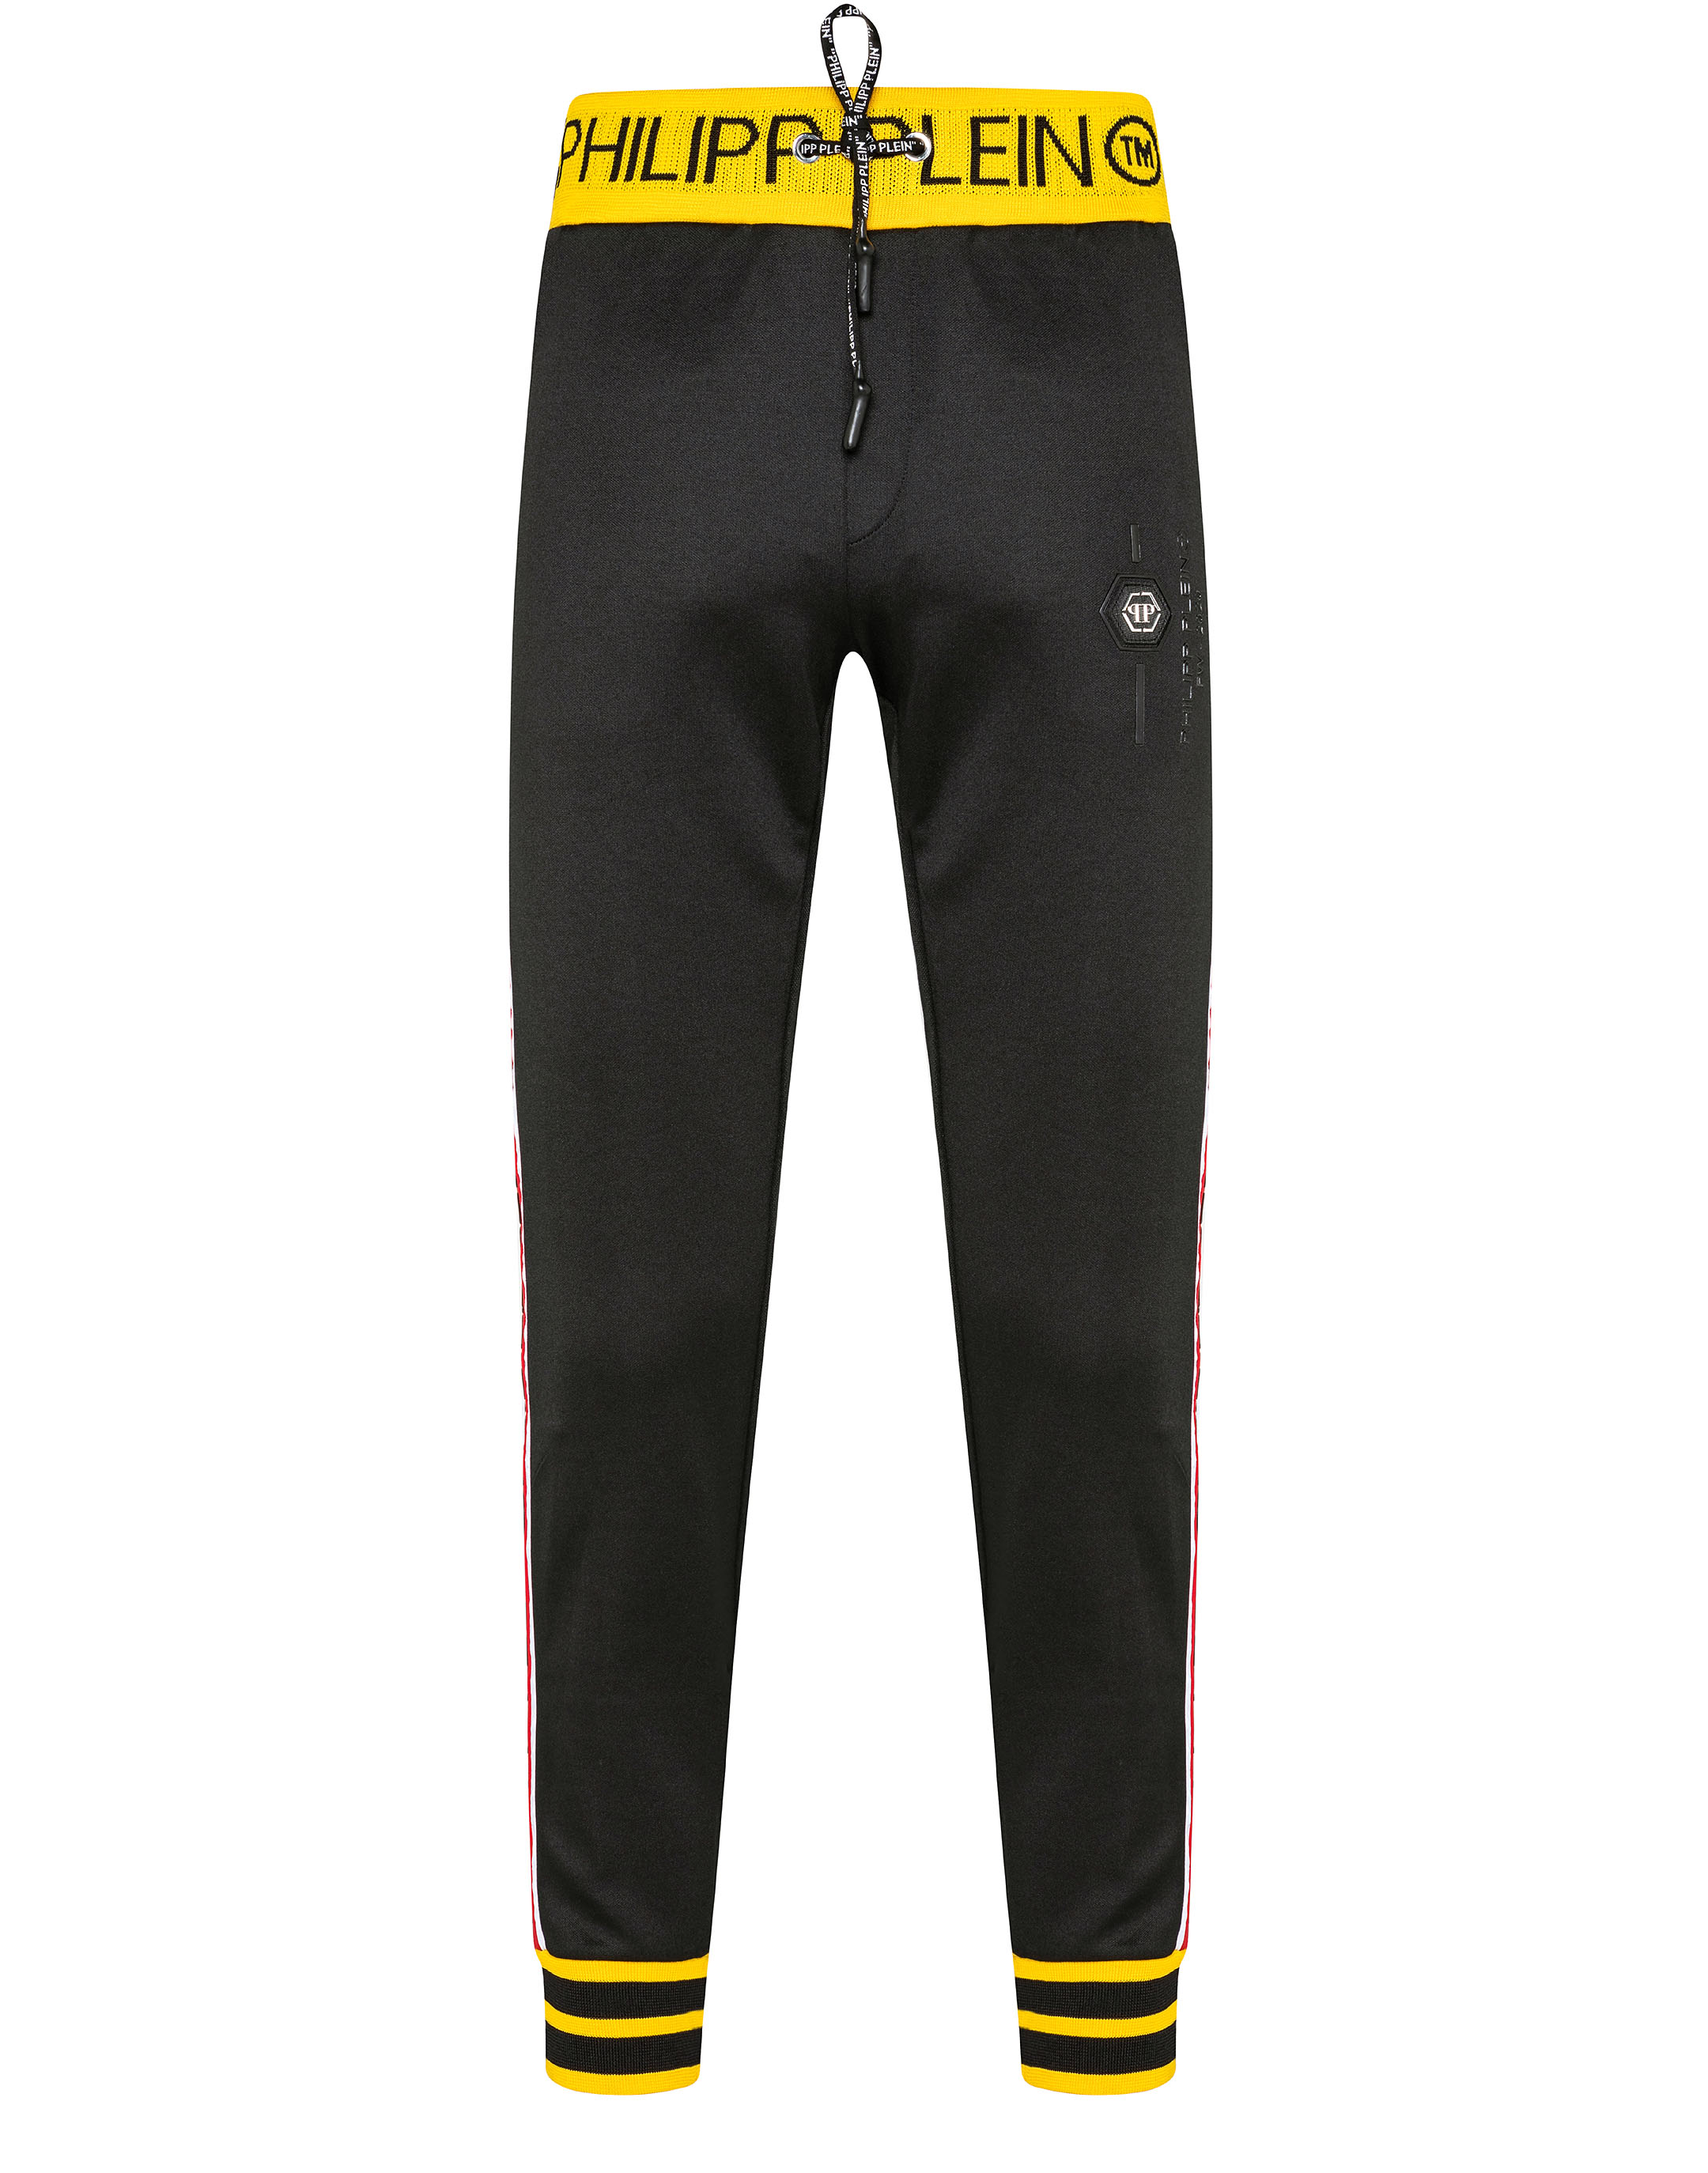 Jogging Trousers Anniversary 20th | Philipp Plein Outlet